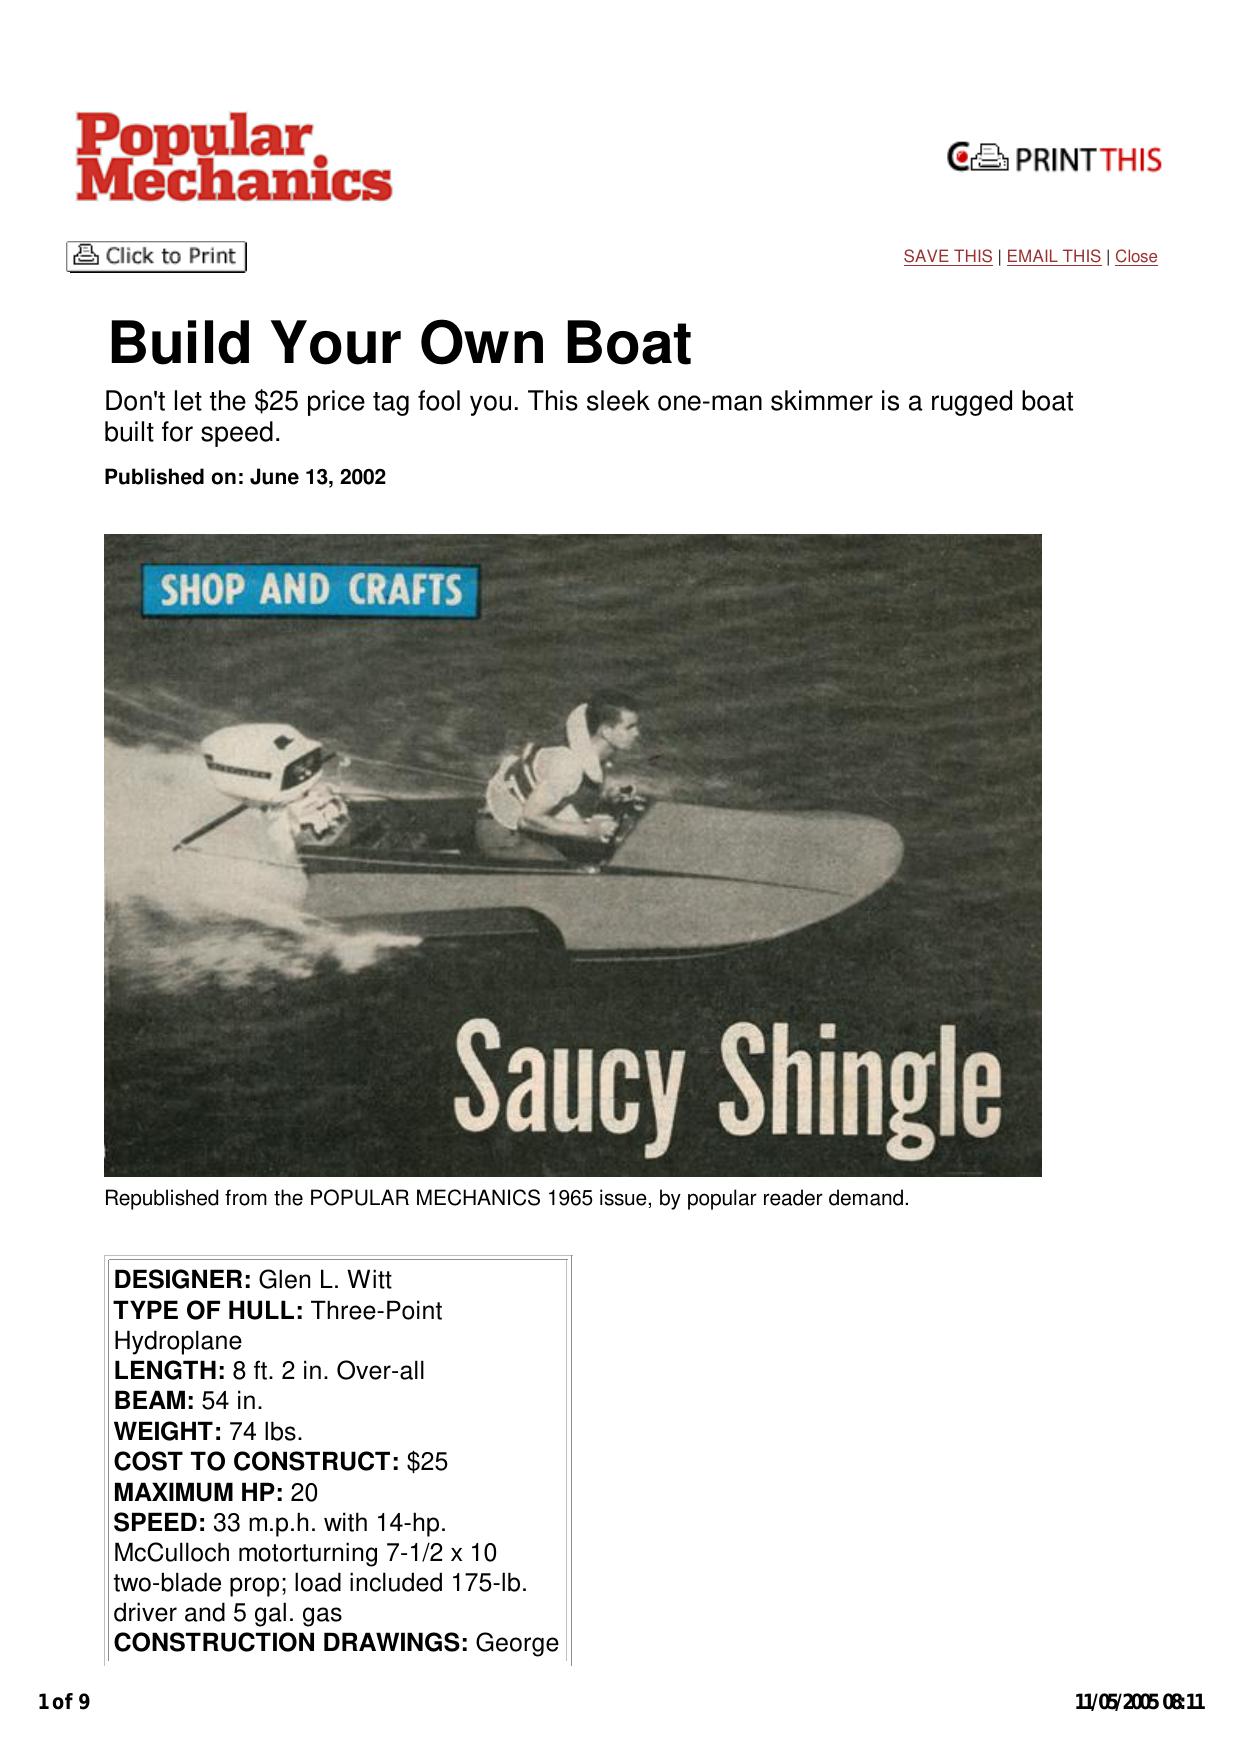 Build Your Own Boat: POPULAR MECHANICS, March 1965